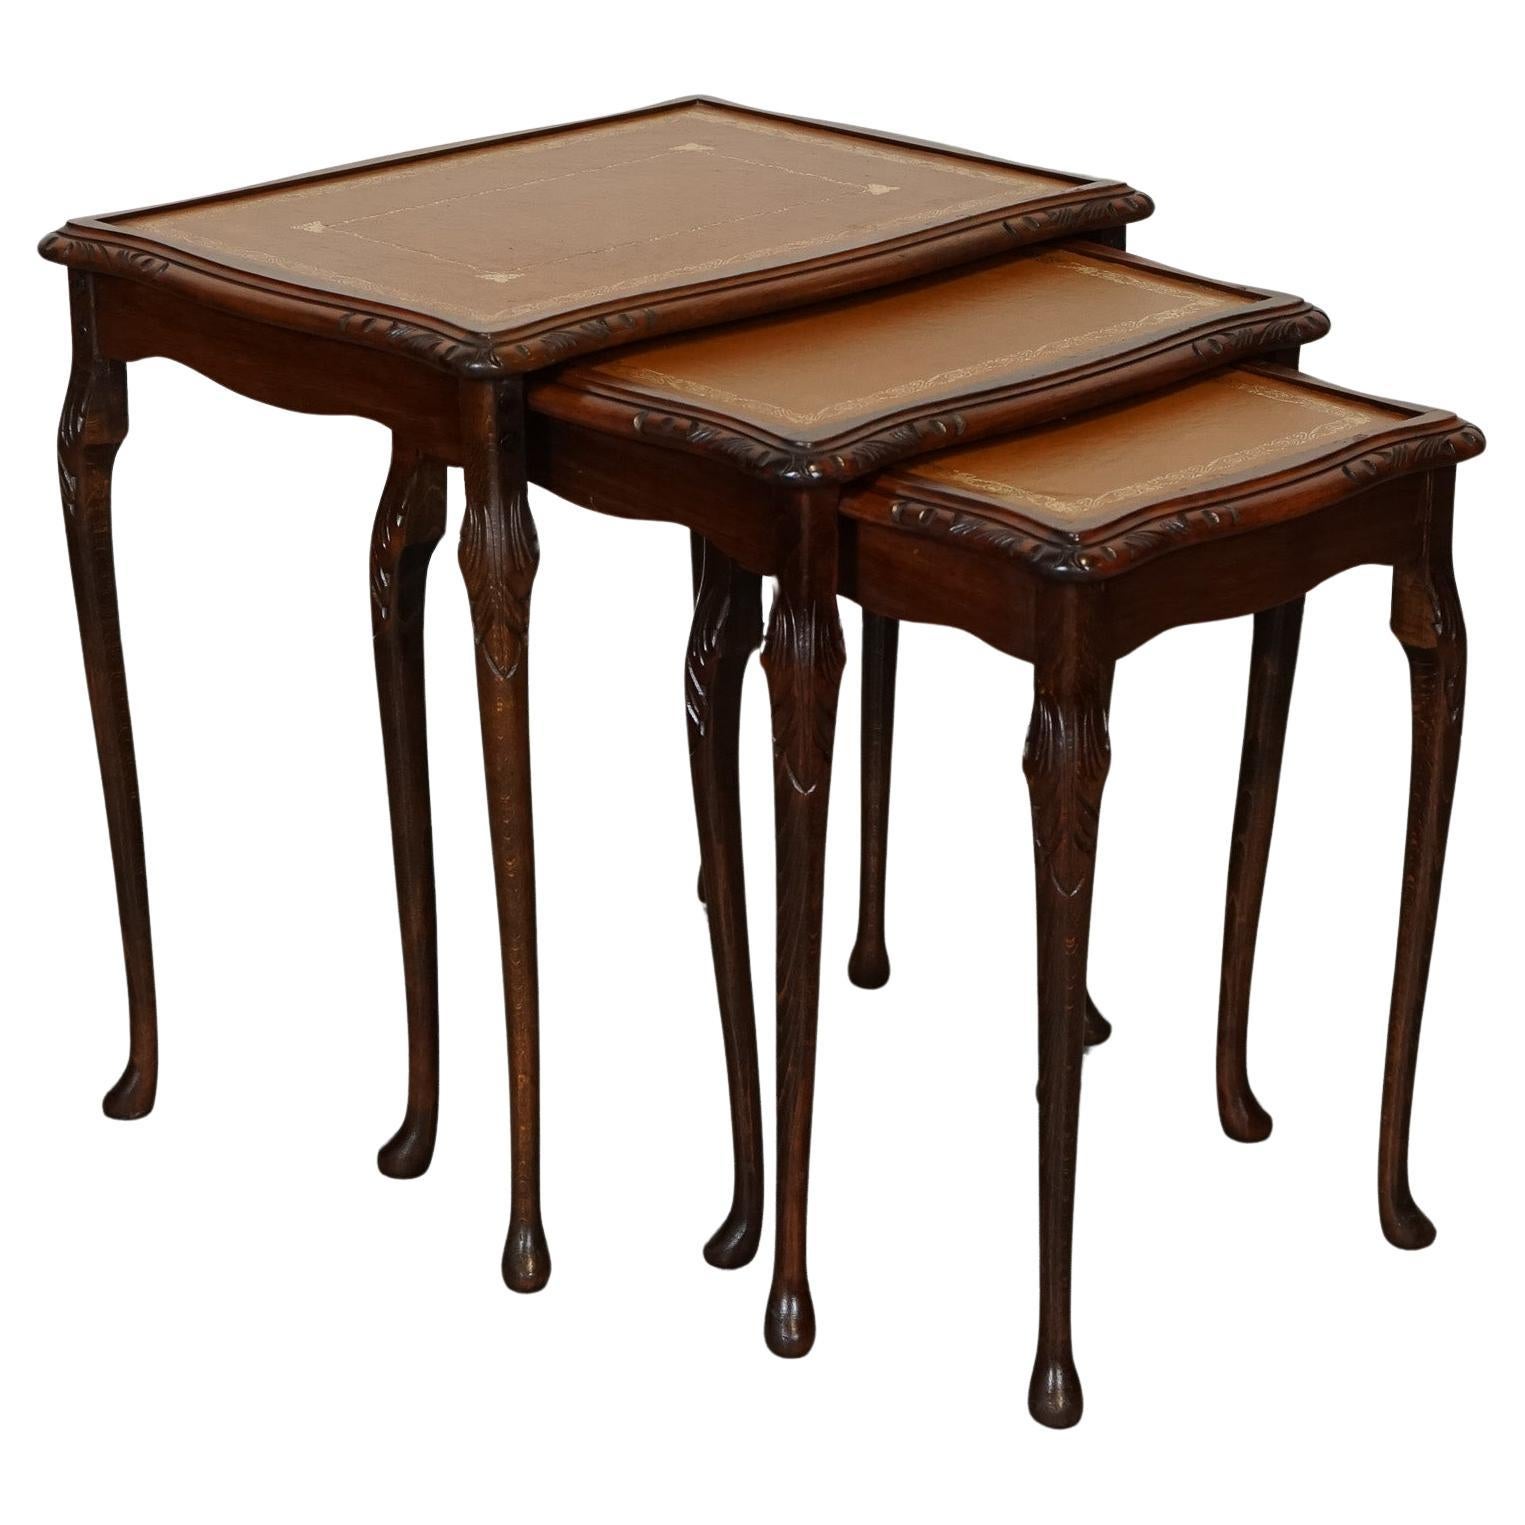 VINTAGE NEST OF TABLES QUEEN ANNE  Style LEGS WiTH BROWN EMBOSsed LEATHER TOP J1 im Angebot